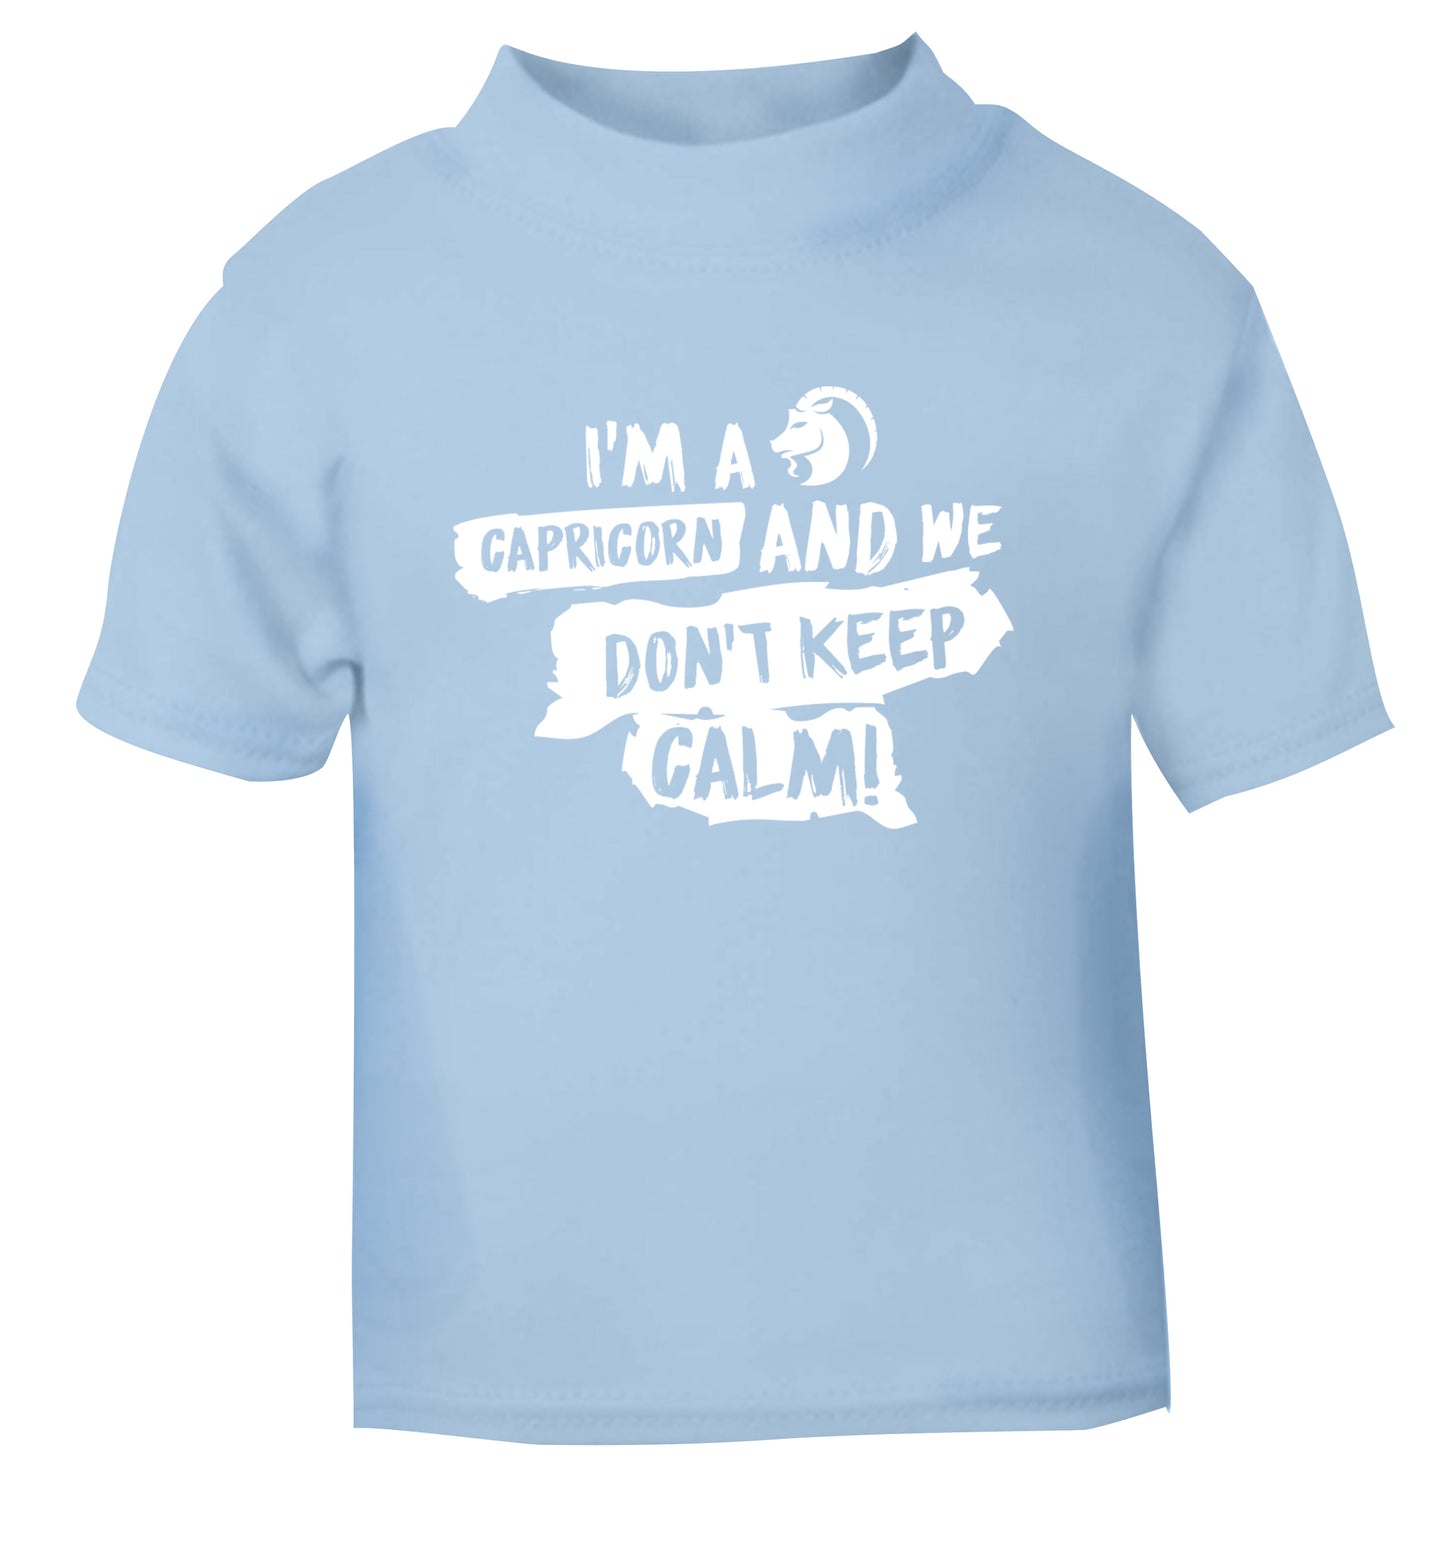 I'm a capricorn and we don't keep calm light blue Baby Toddler Tshirt 2 Years